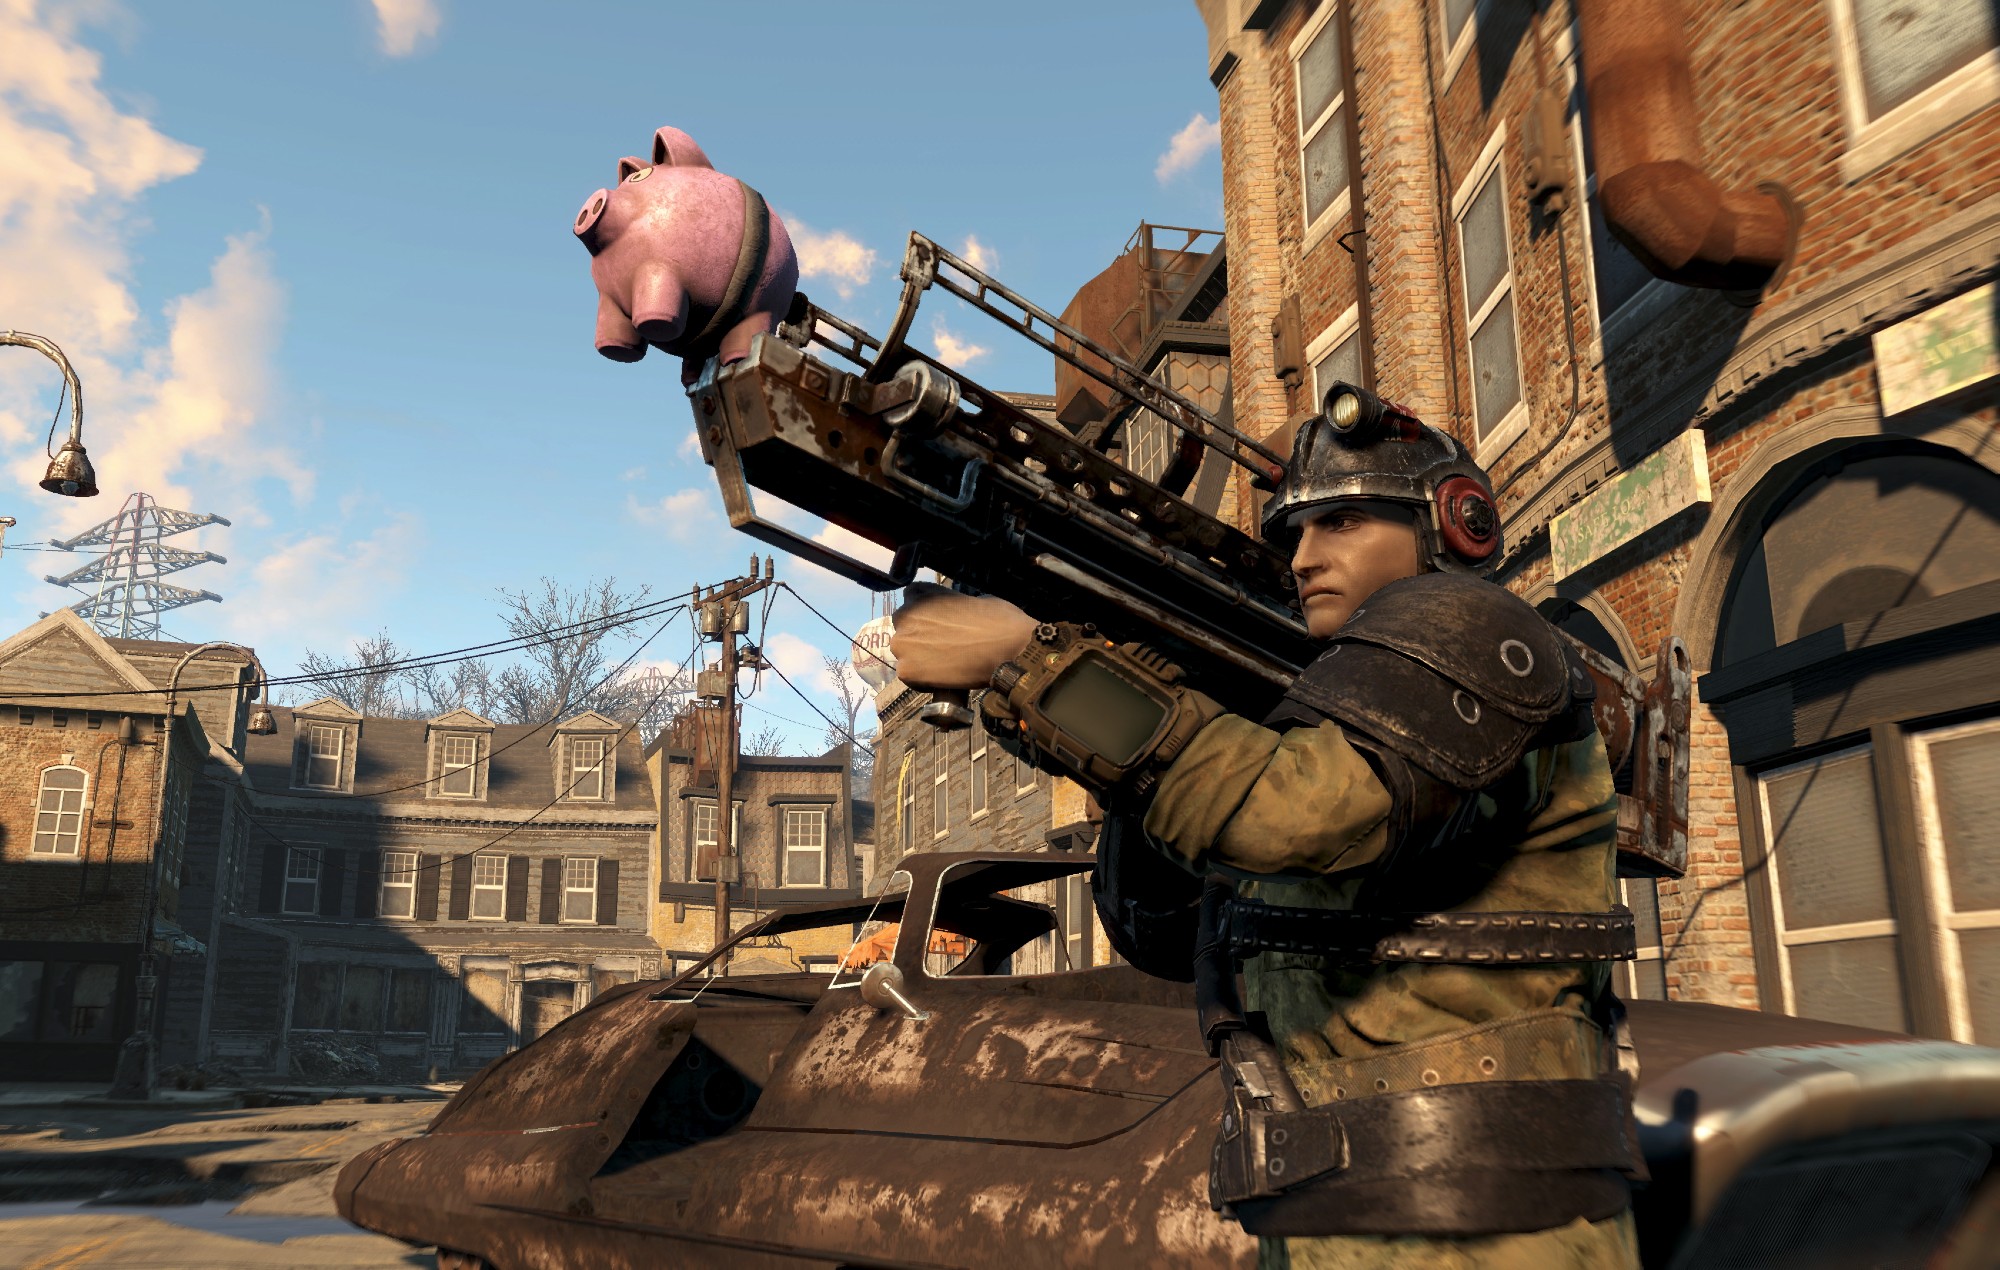 ‘Fallout 4’ to receive long-awaited update following the launch of TV series